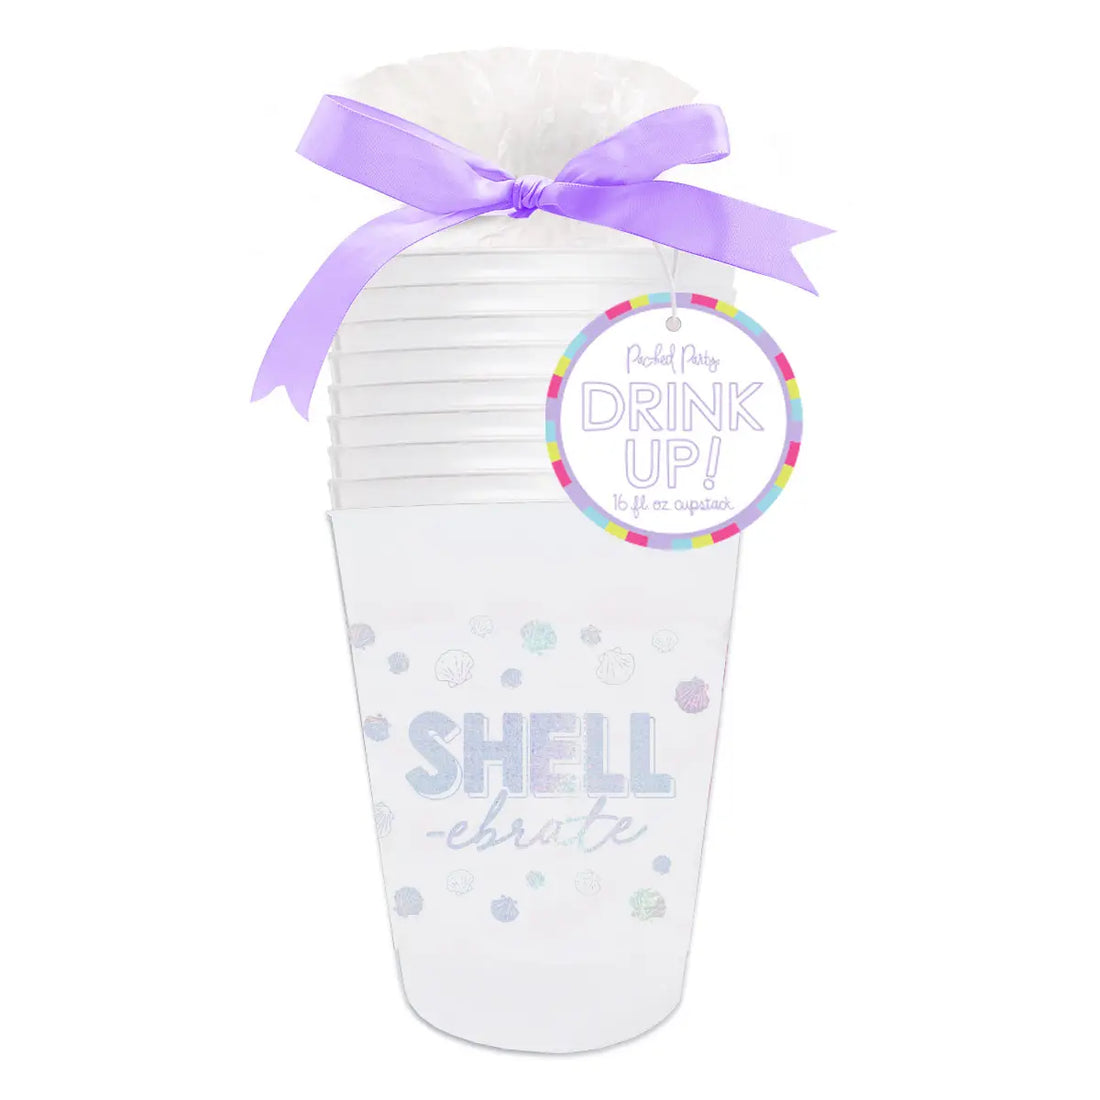 Shell-ebrate Reusable Cups